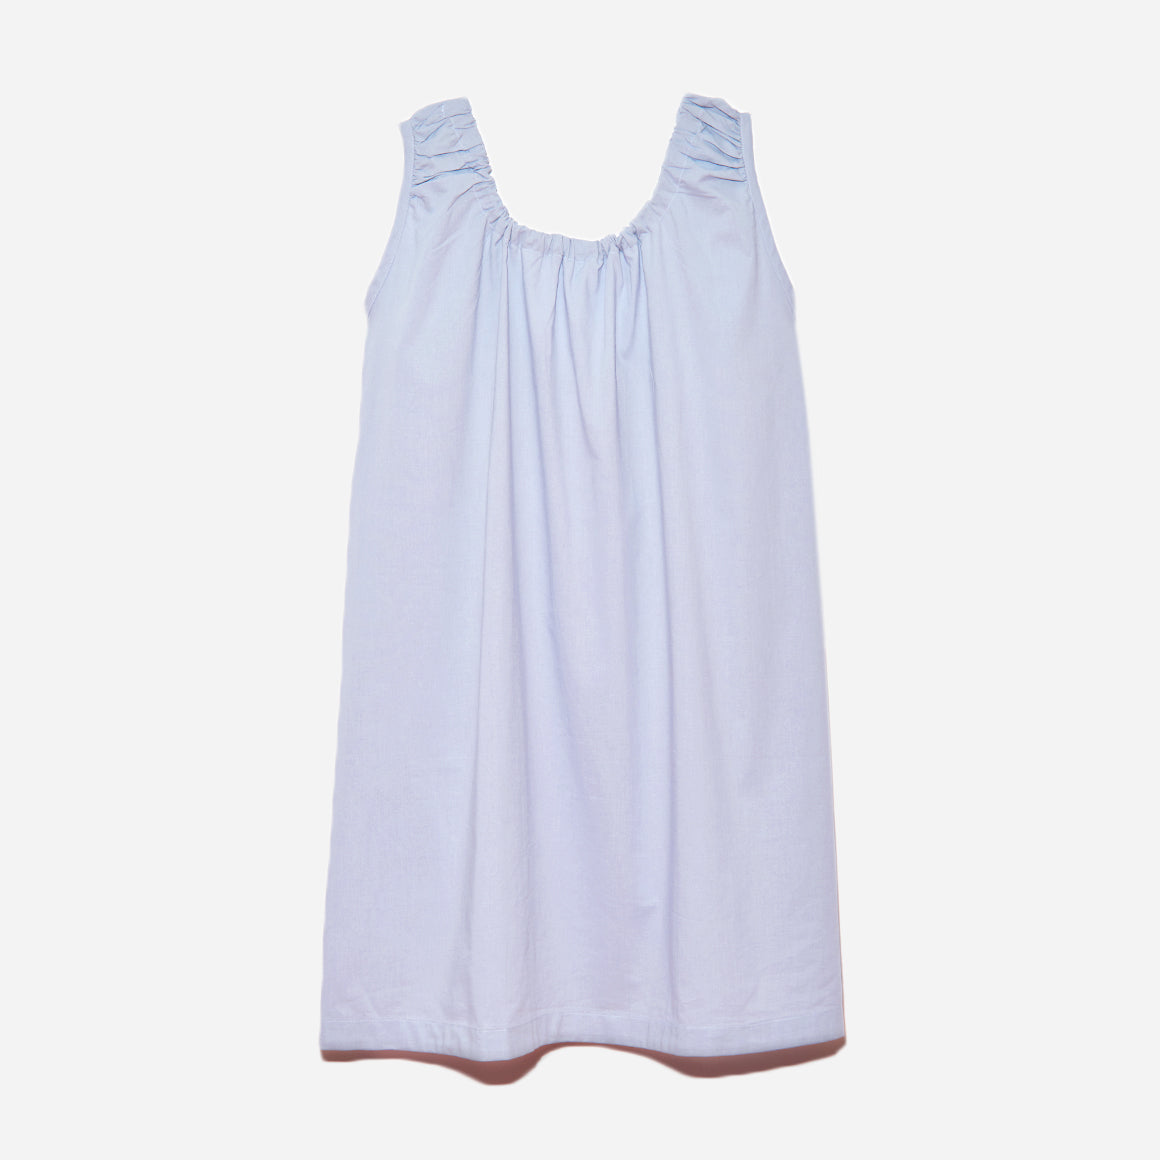 Made from a breathable and soft GOTS-certified organic cotton that feels light and airy on your skin, you’ll love the flattering drape of the material and comfy, unrestricted fit. The deep armholes and low scoop back provide maximum comfort for your bedtime and morning rituals.